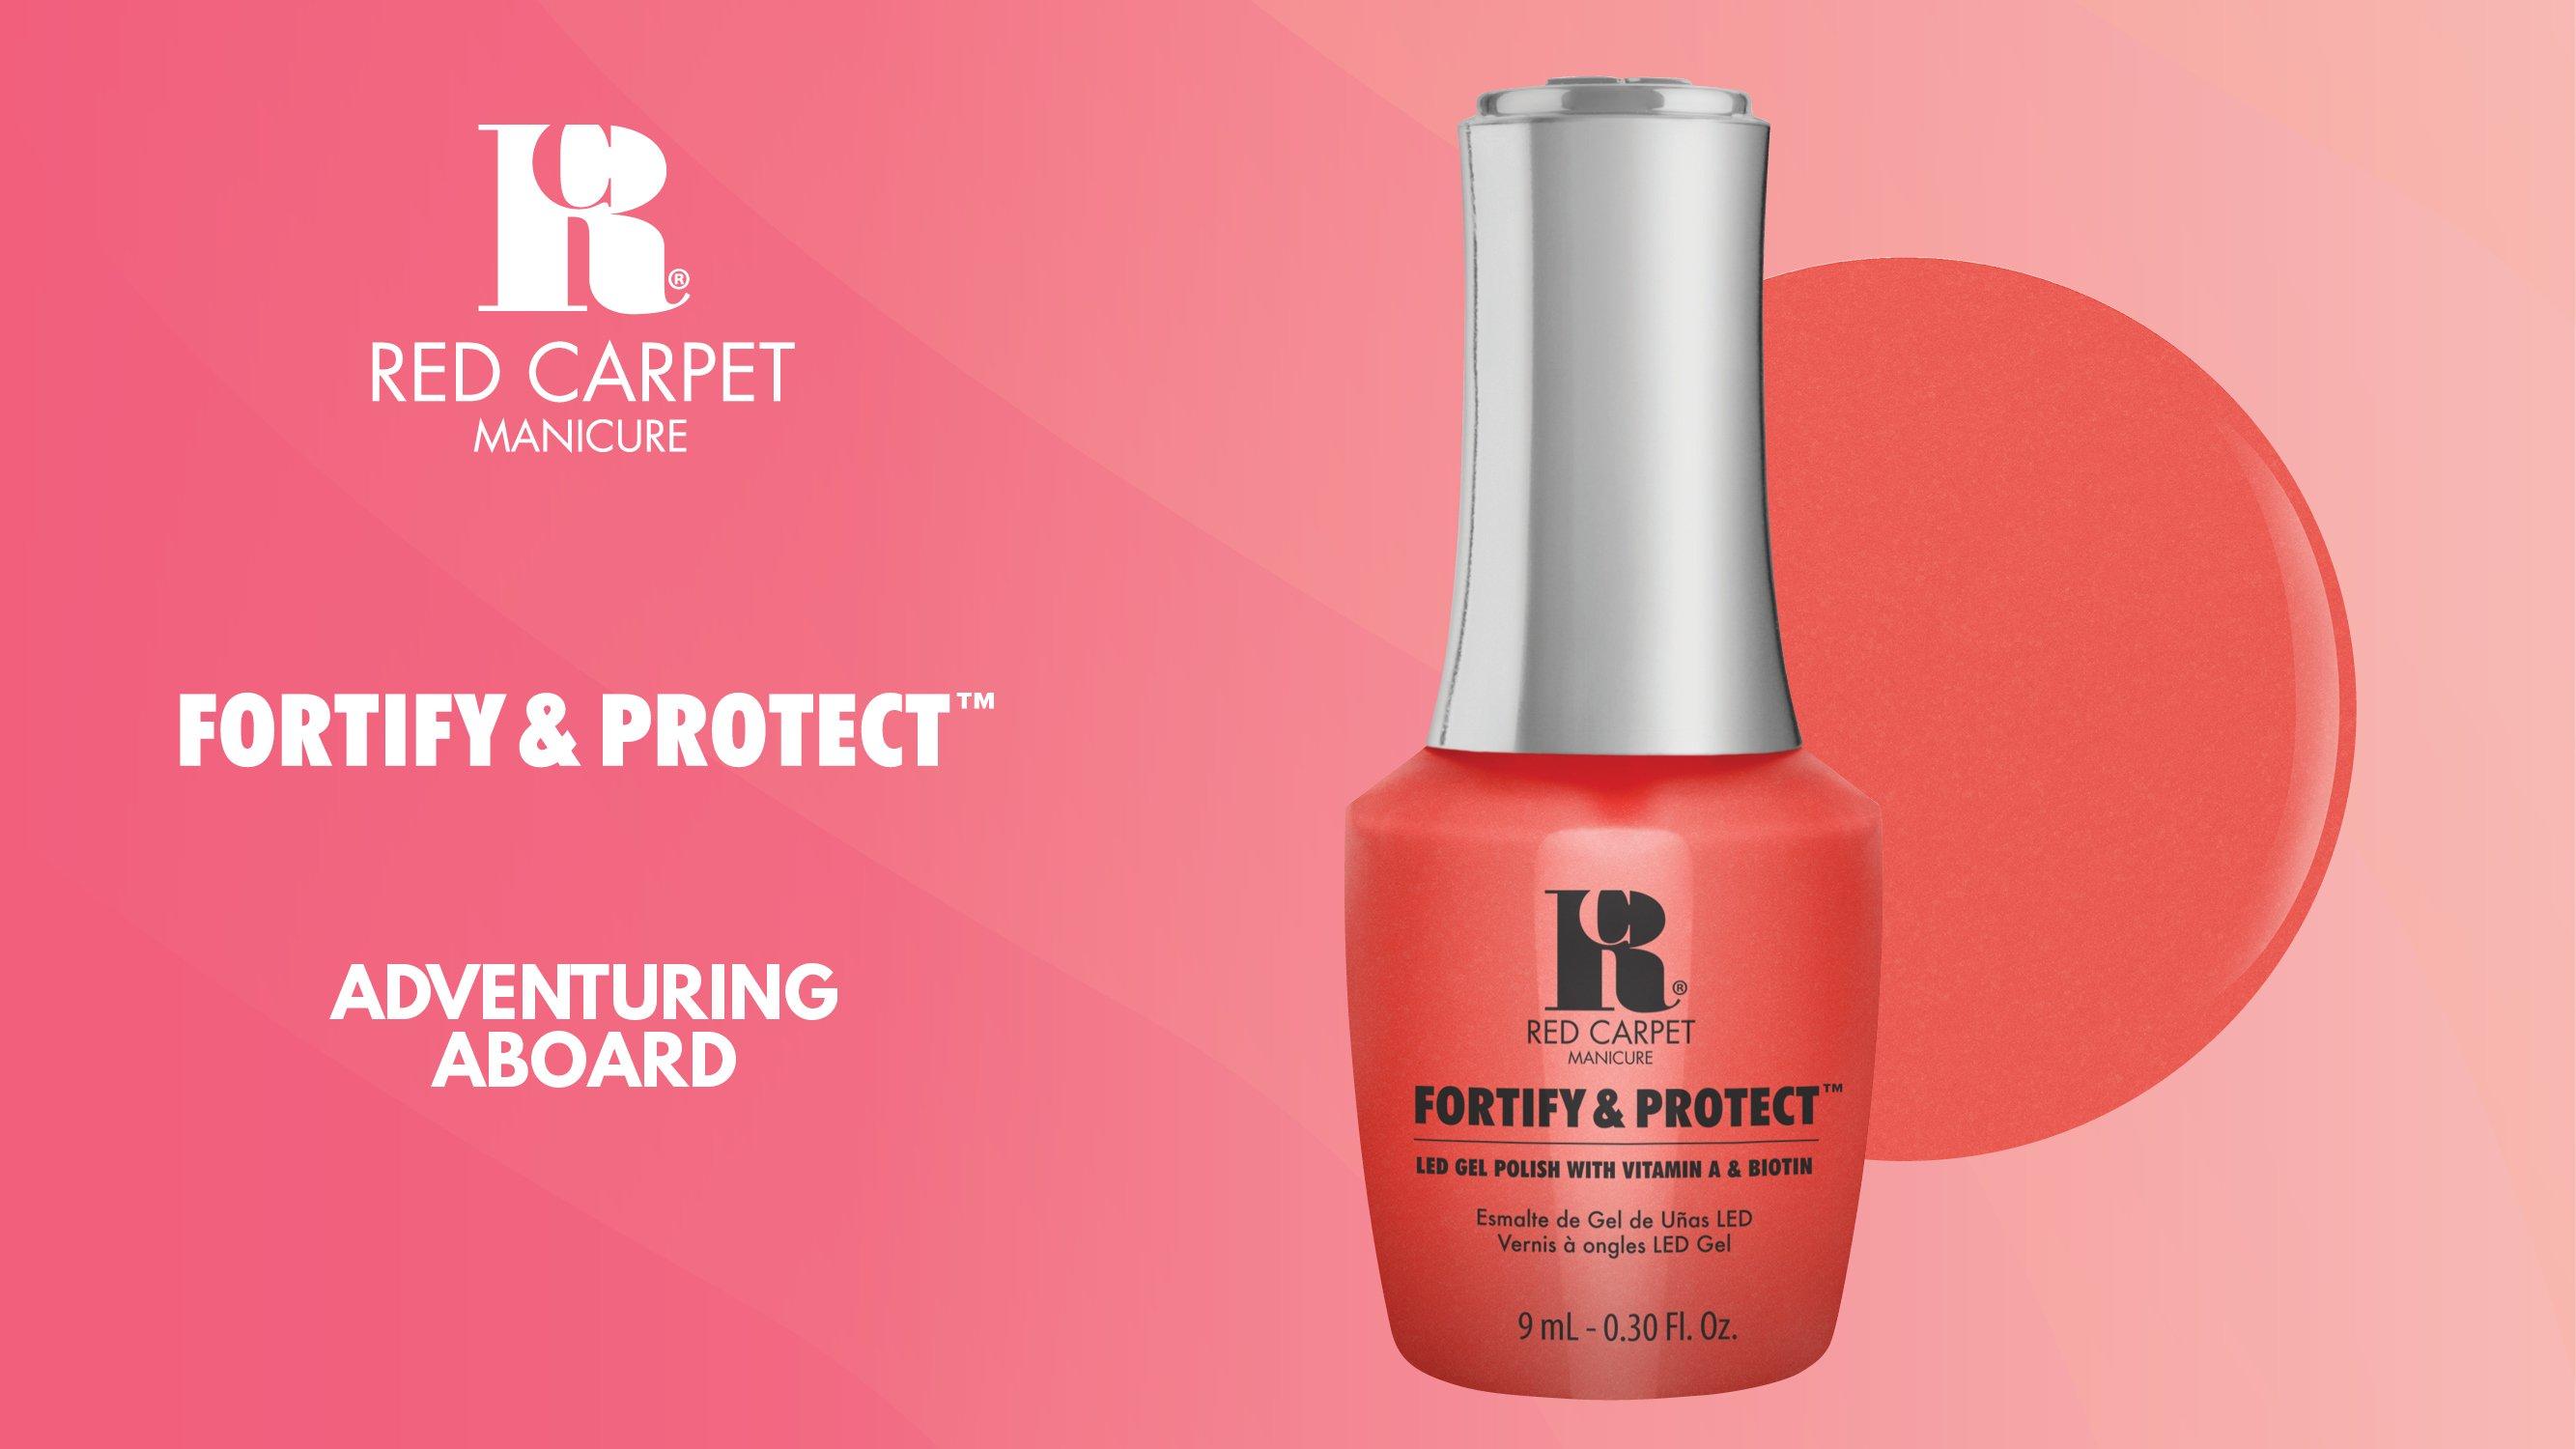 Fortify & Protect LED Gel Nail Polish Collection - Red Carpet Manicure